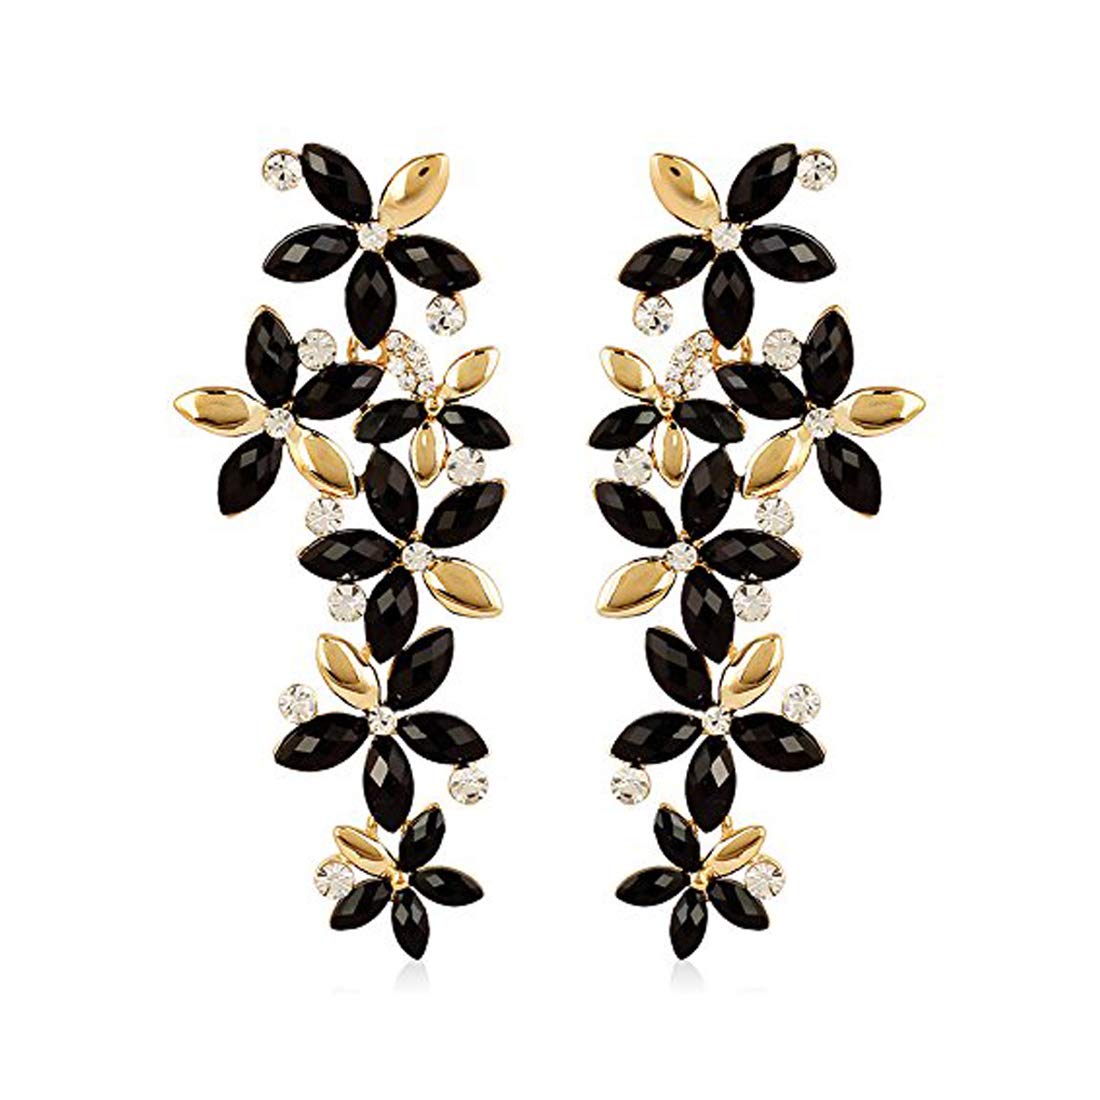 Yellow Chimes Floral Design White Crystal Dangle Earrings for Women